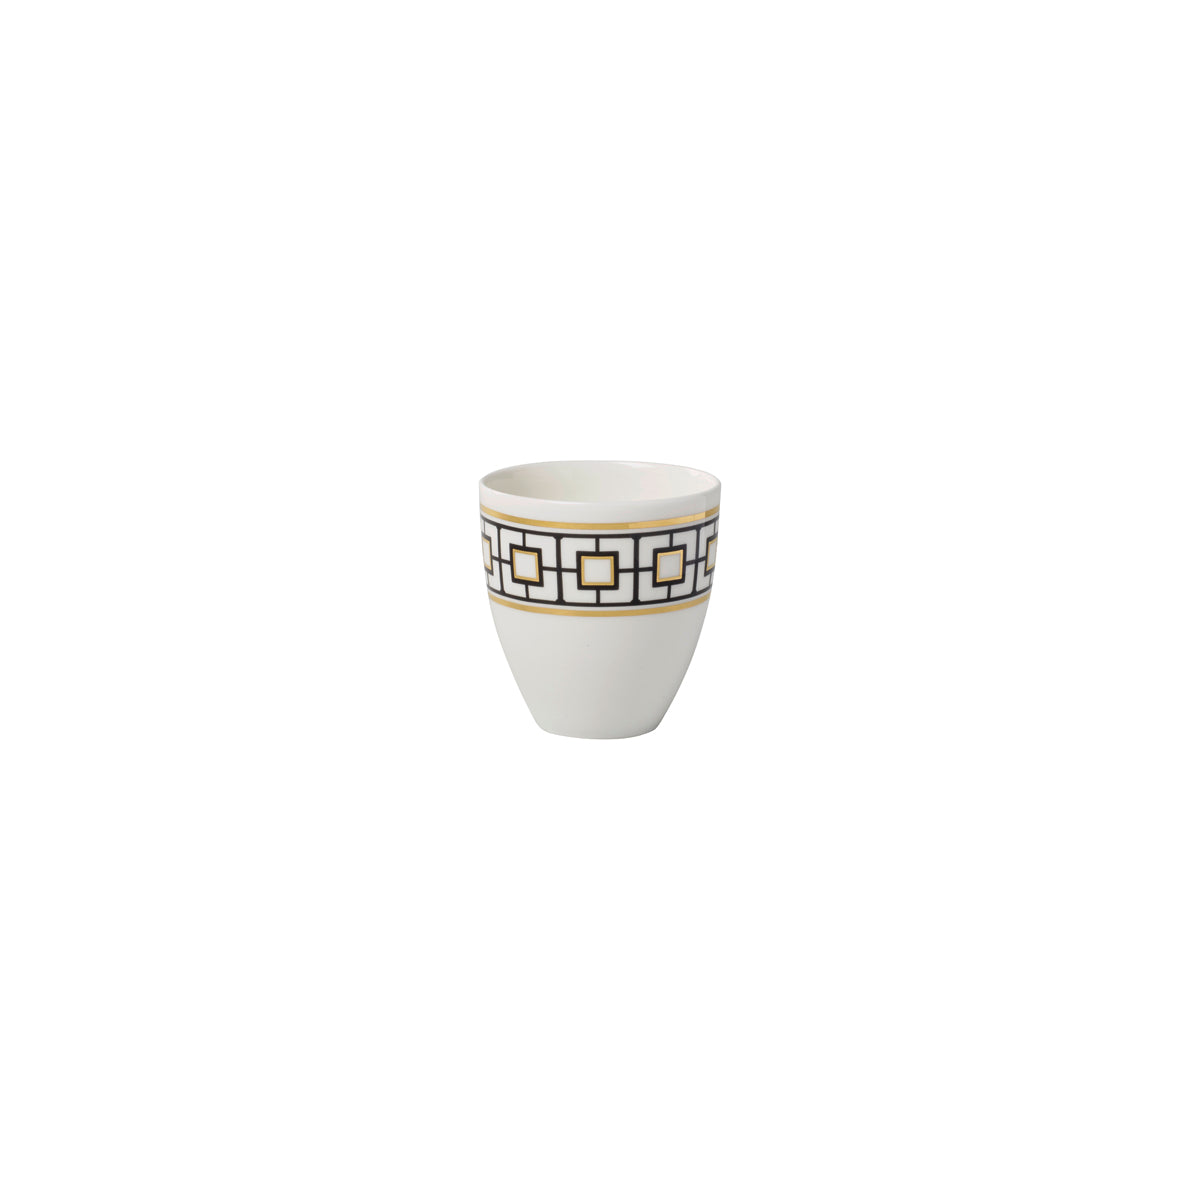 VB10-4483-4892 Villeroy And Boch Villeroy And Boch Metrochic Gifts Tea Cup 150ml Tomkin Australia Hospitality Supplies